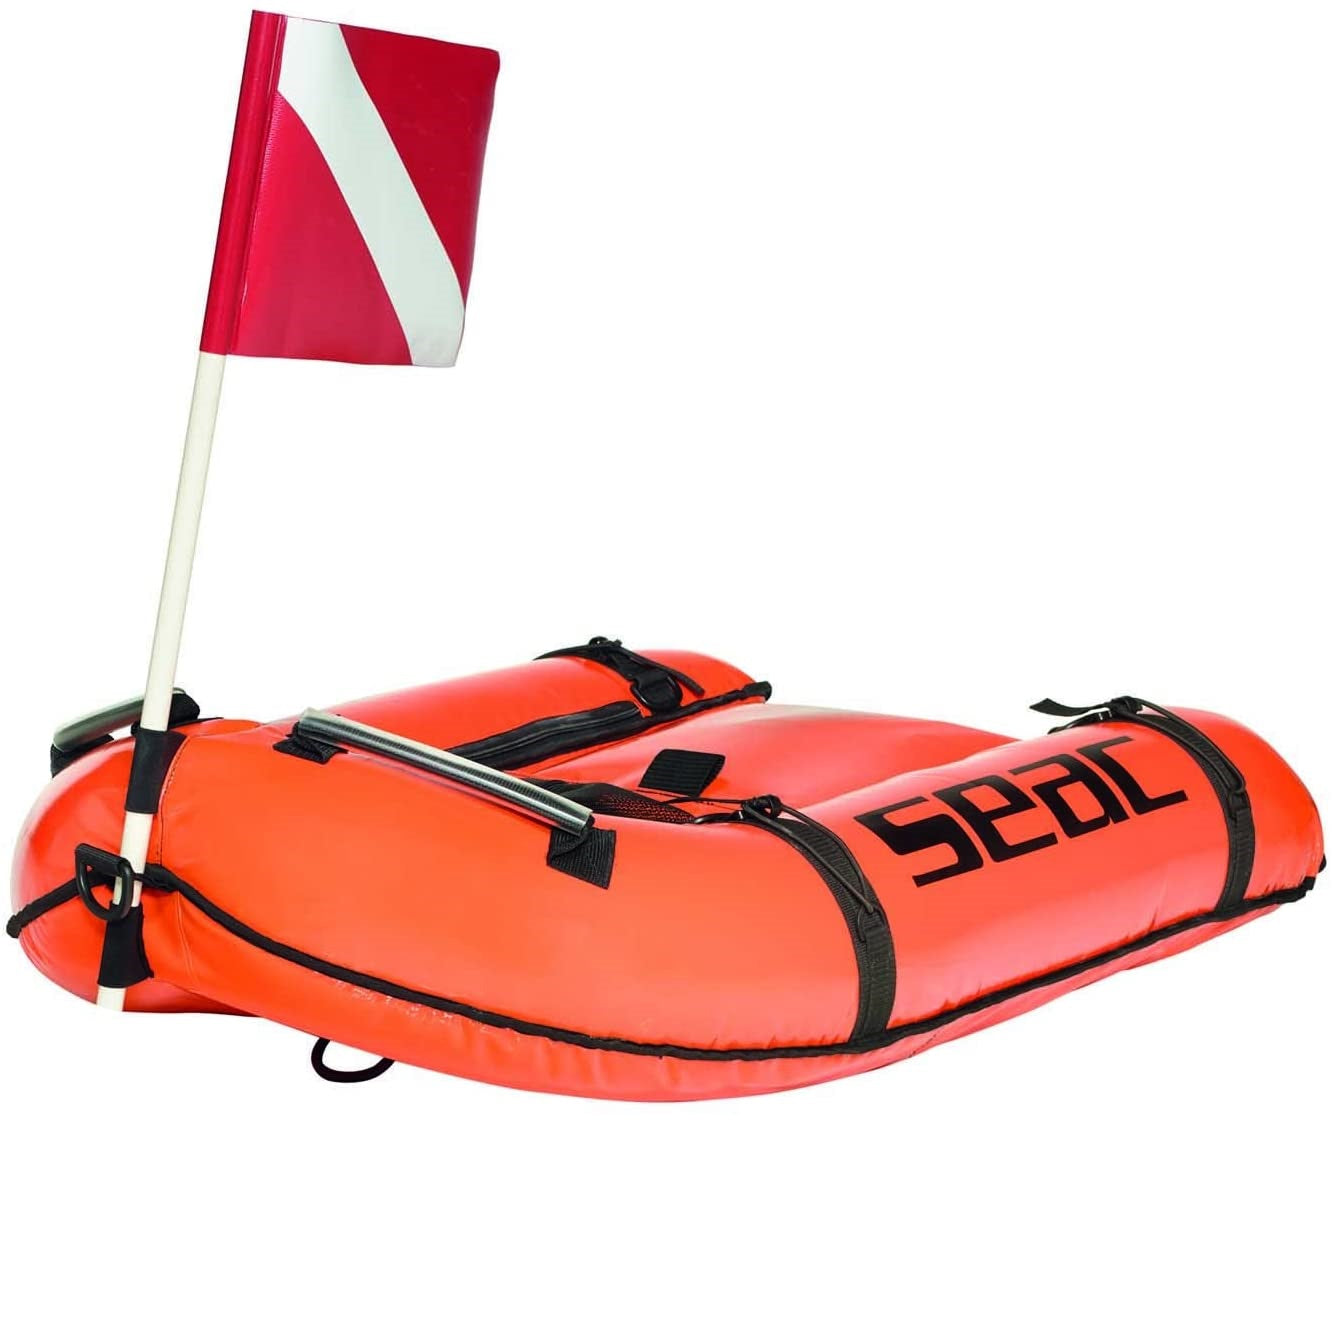 SEAC Bounty, Inflatable Float Board for Freediving and Spearfishing,  31.5x21.6 in, Alpha Bow Flag Included, Orange